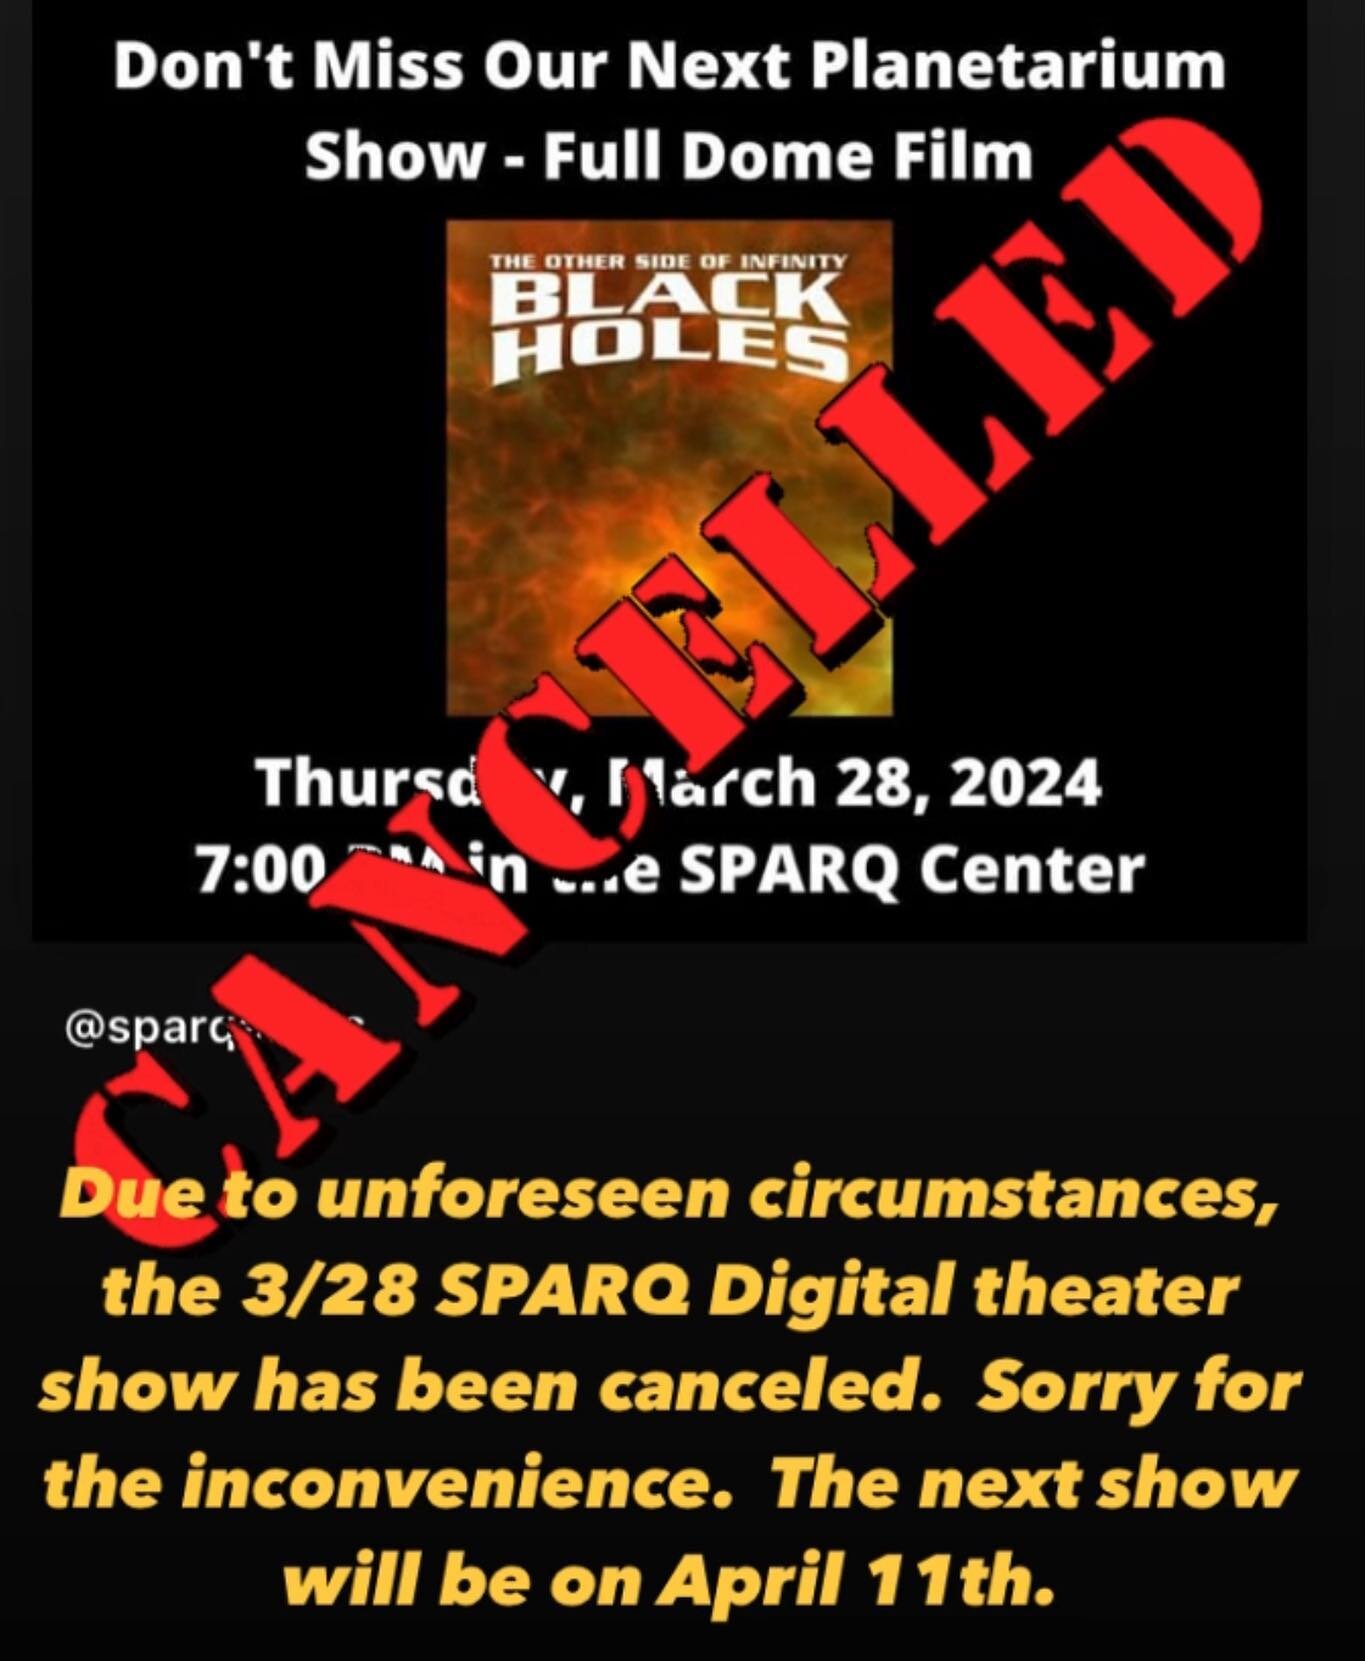 Due to unforeseen circumstances, the 3/28  SPARQ Digital theater show has been canceled.  We apologize for the inconvenience.  The next show will be on April 11th.